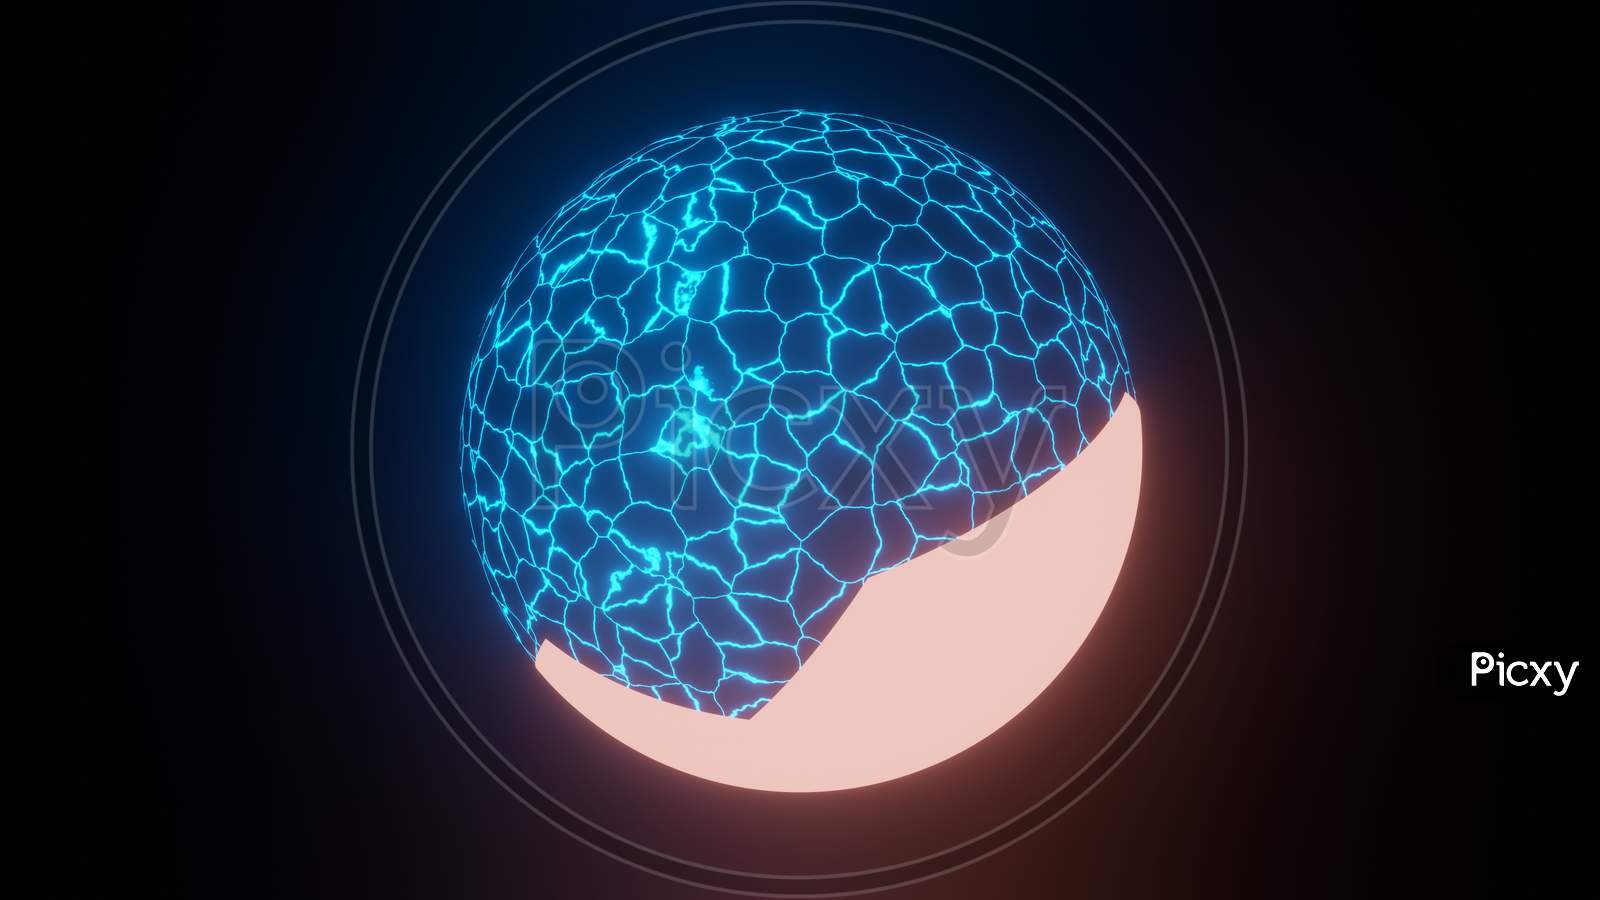 Illustration Graphic Of 3D Render Blue Wired Frame Plasma Sphere Or Circle And It'S Glowing Shell, Isolated On Black Background. Seamless Loop. Illustration Of Energy Ball With Shell.